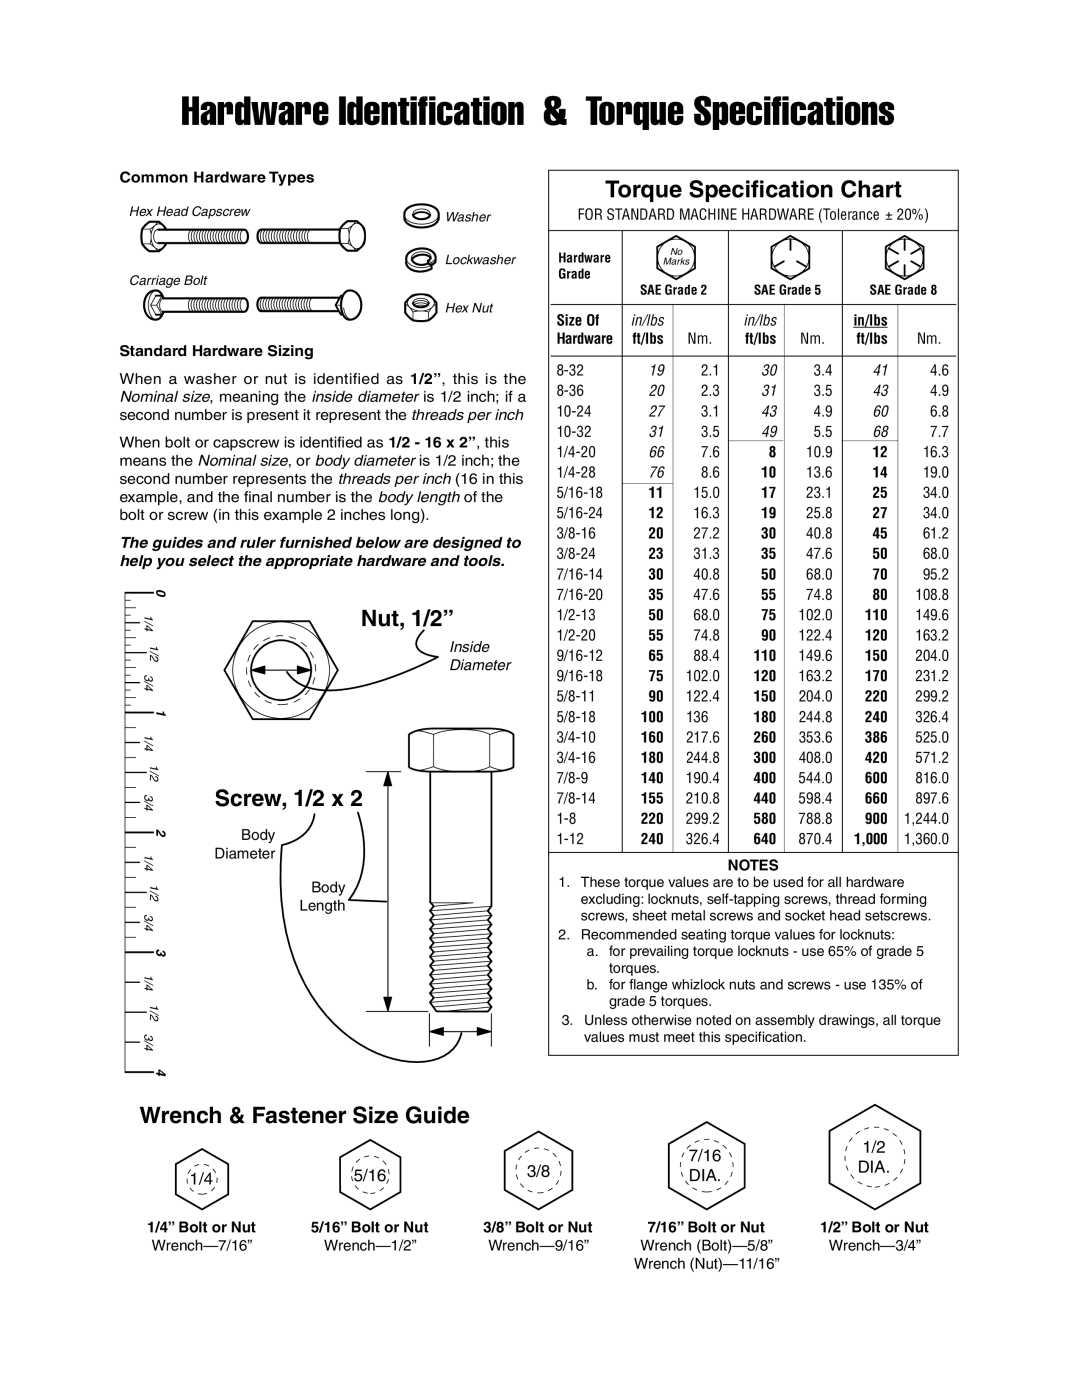 Simplicity 1694538 Wrench & Fastener Size Guide, Common Hardware Types, Standard Hardware Sizing, 1/4” Bolt or Nut, 7/16 